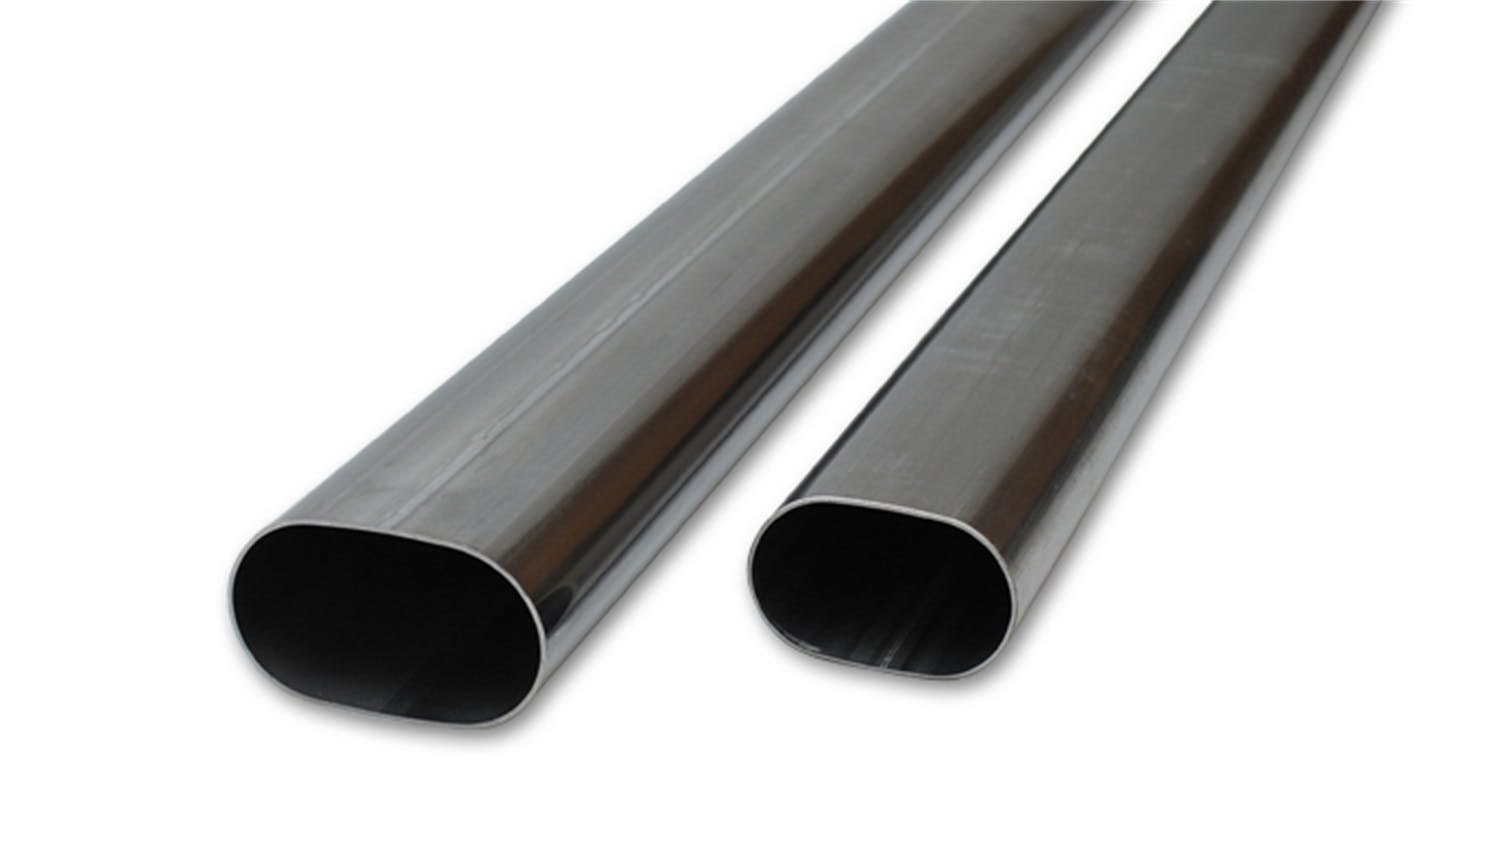 Vibrant Performance 13184 4 inch Oval (nominal) T304 Stainless Steel Straight Tubing - 5 feet long